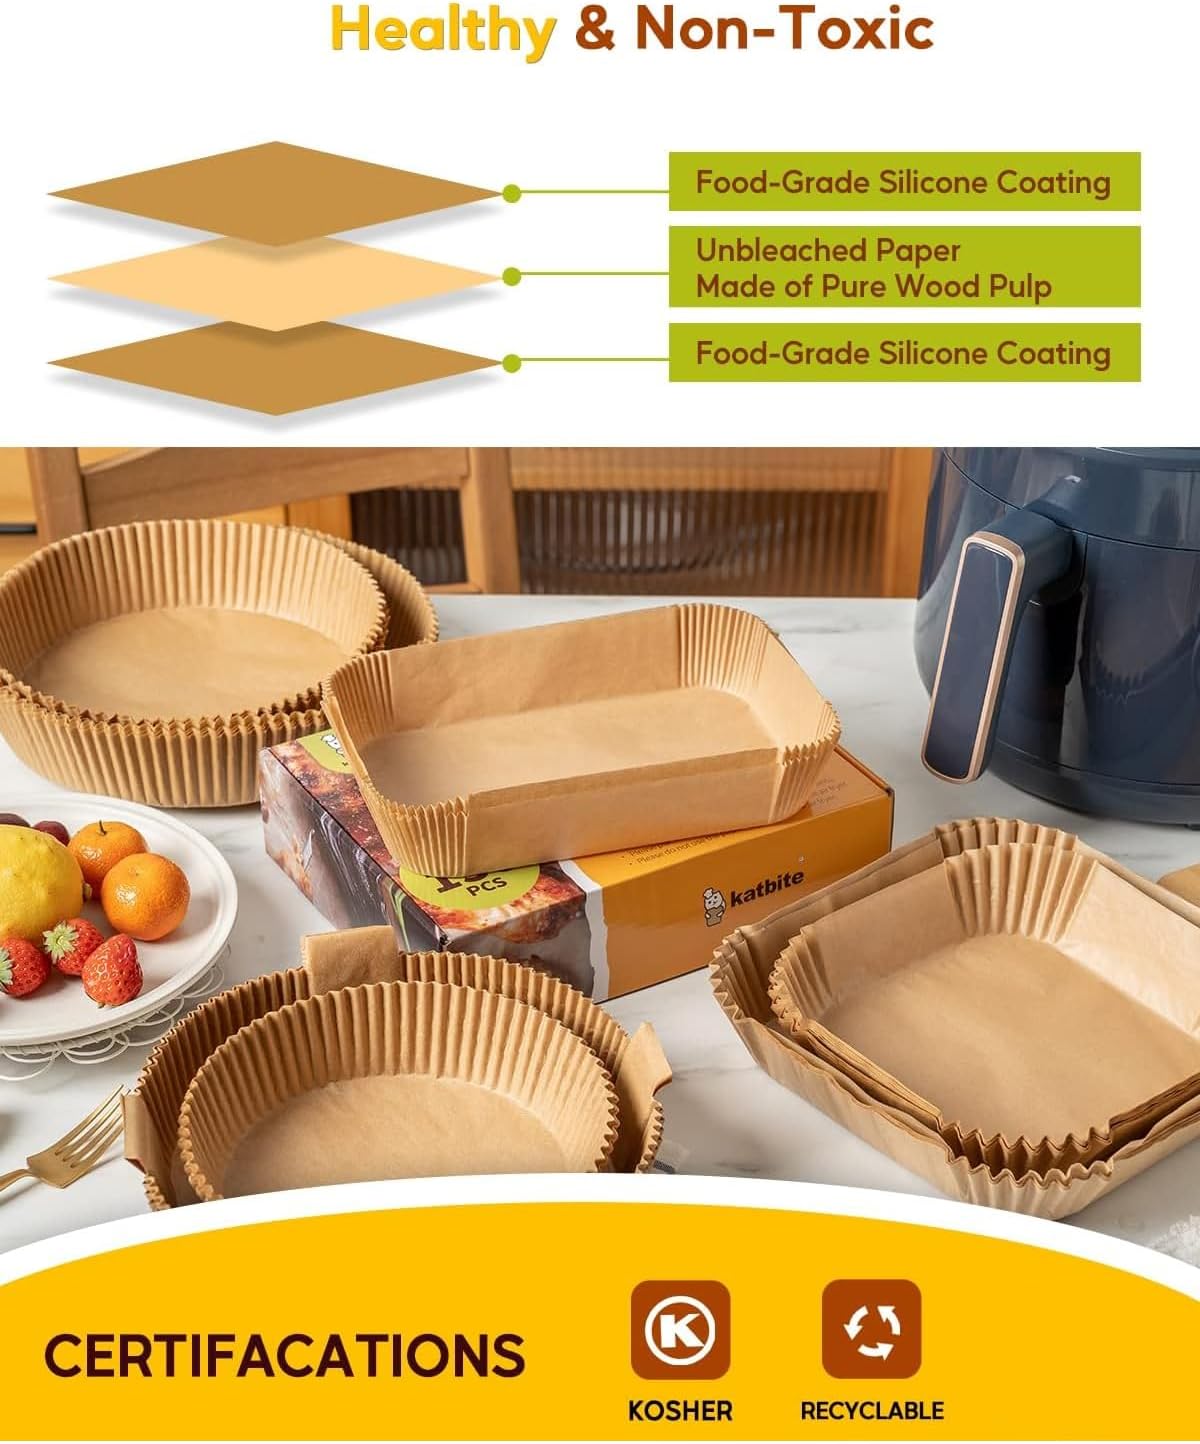 Disposable Air Fryer Liners